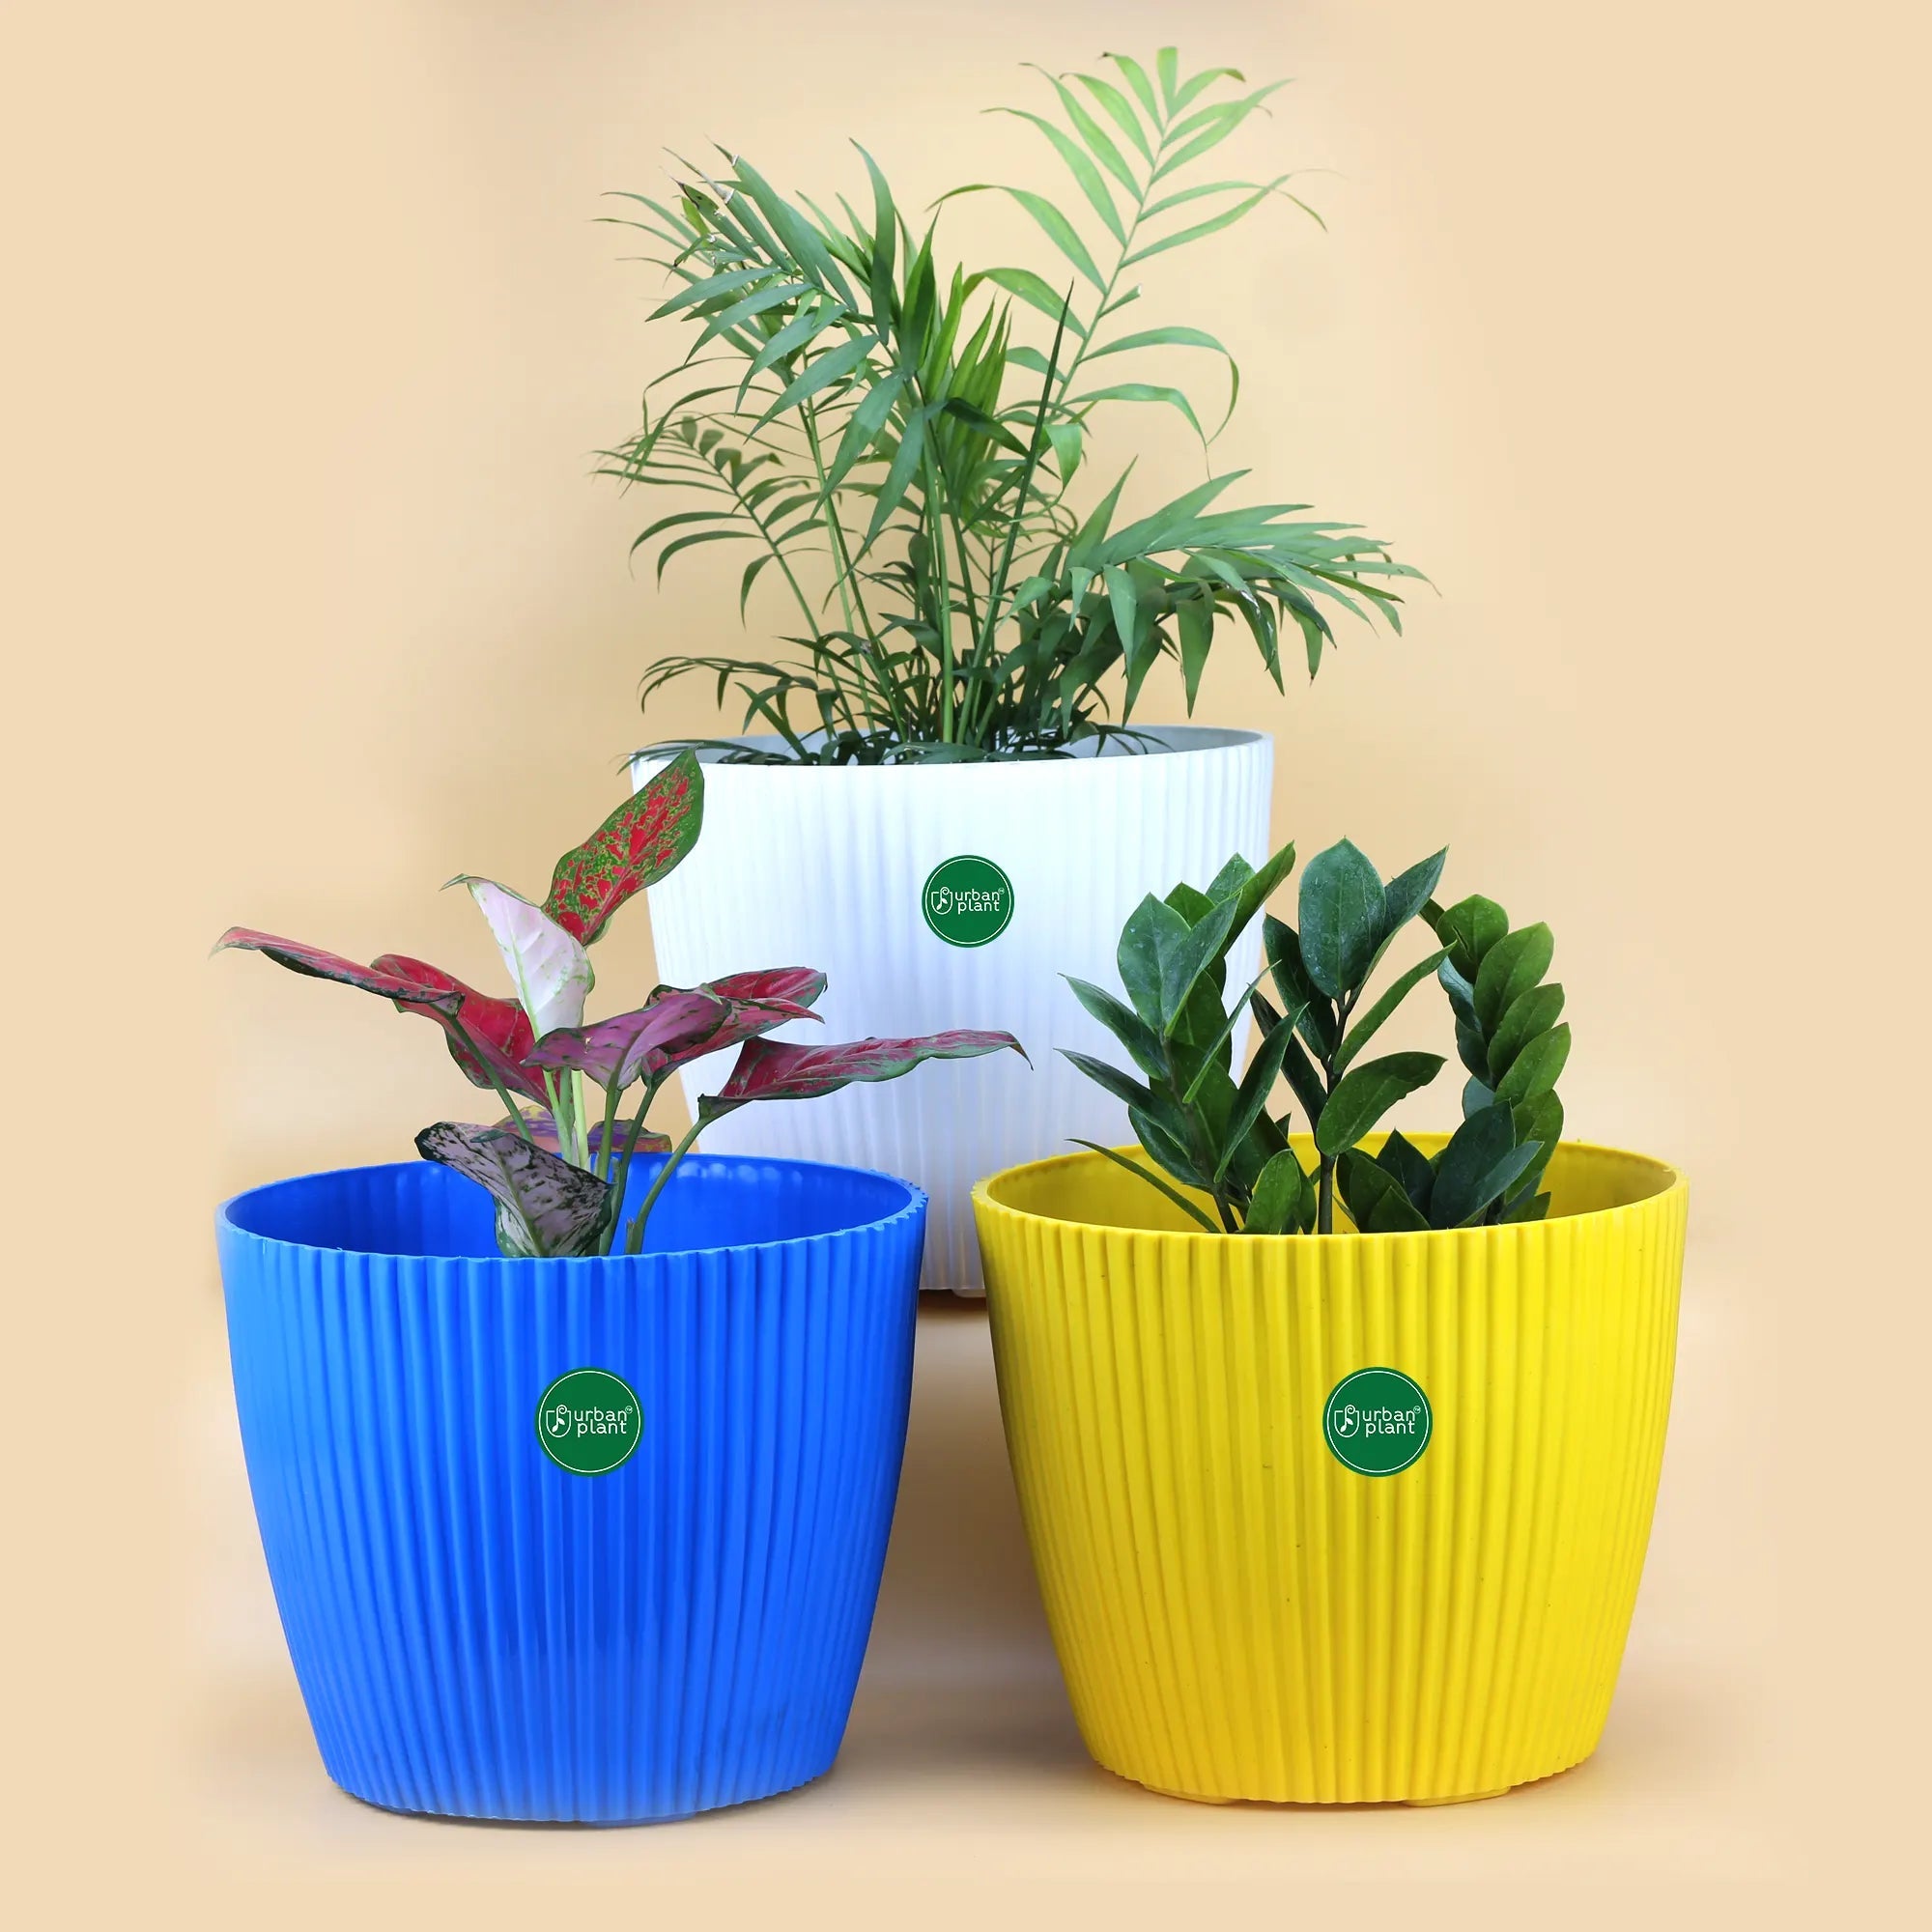 Decorative Round Shape Versatile 9-inch Plastic Pots in Blue, White, and Yellow Urban Plant Multicolor Set of 3 